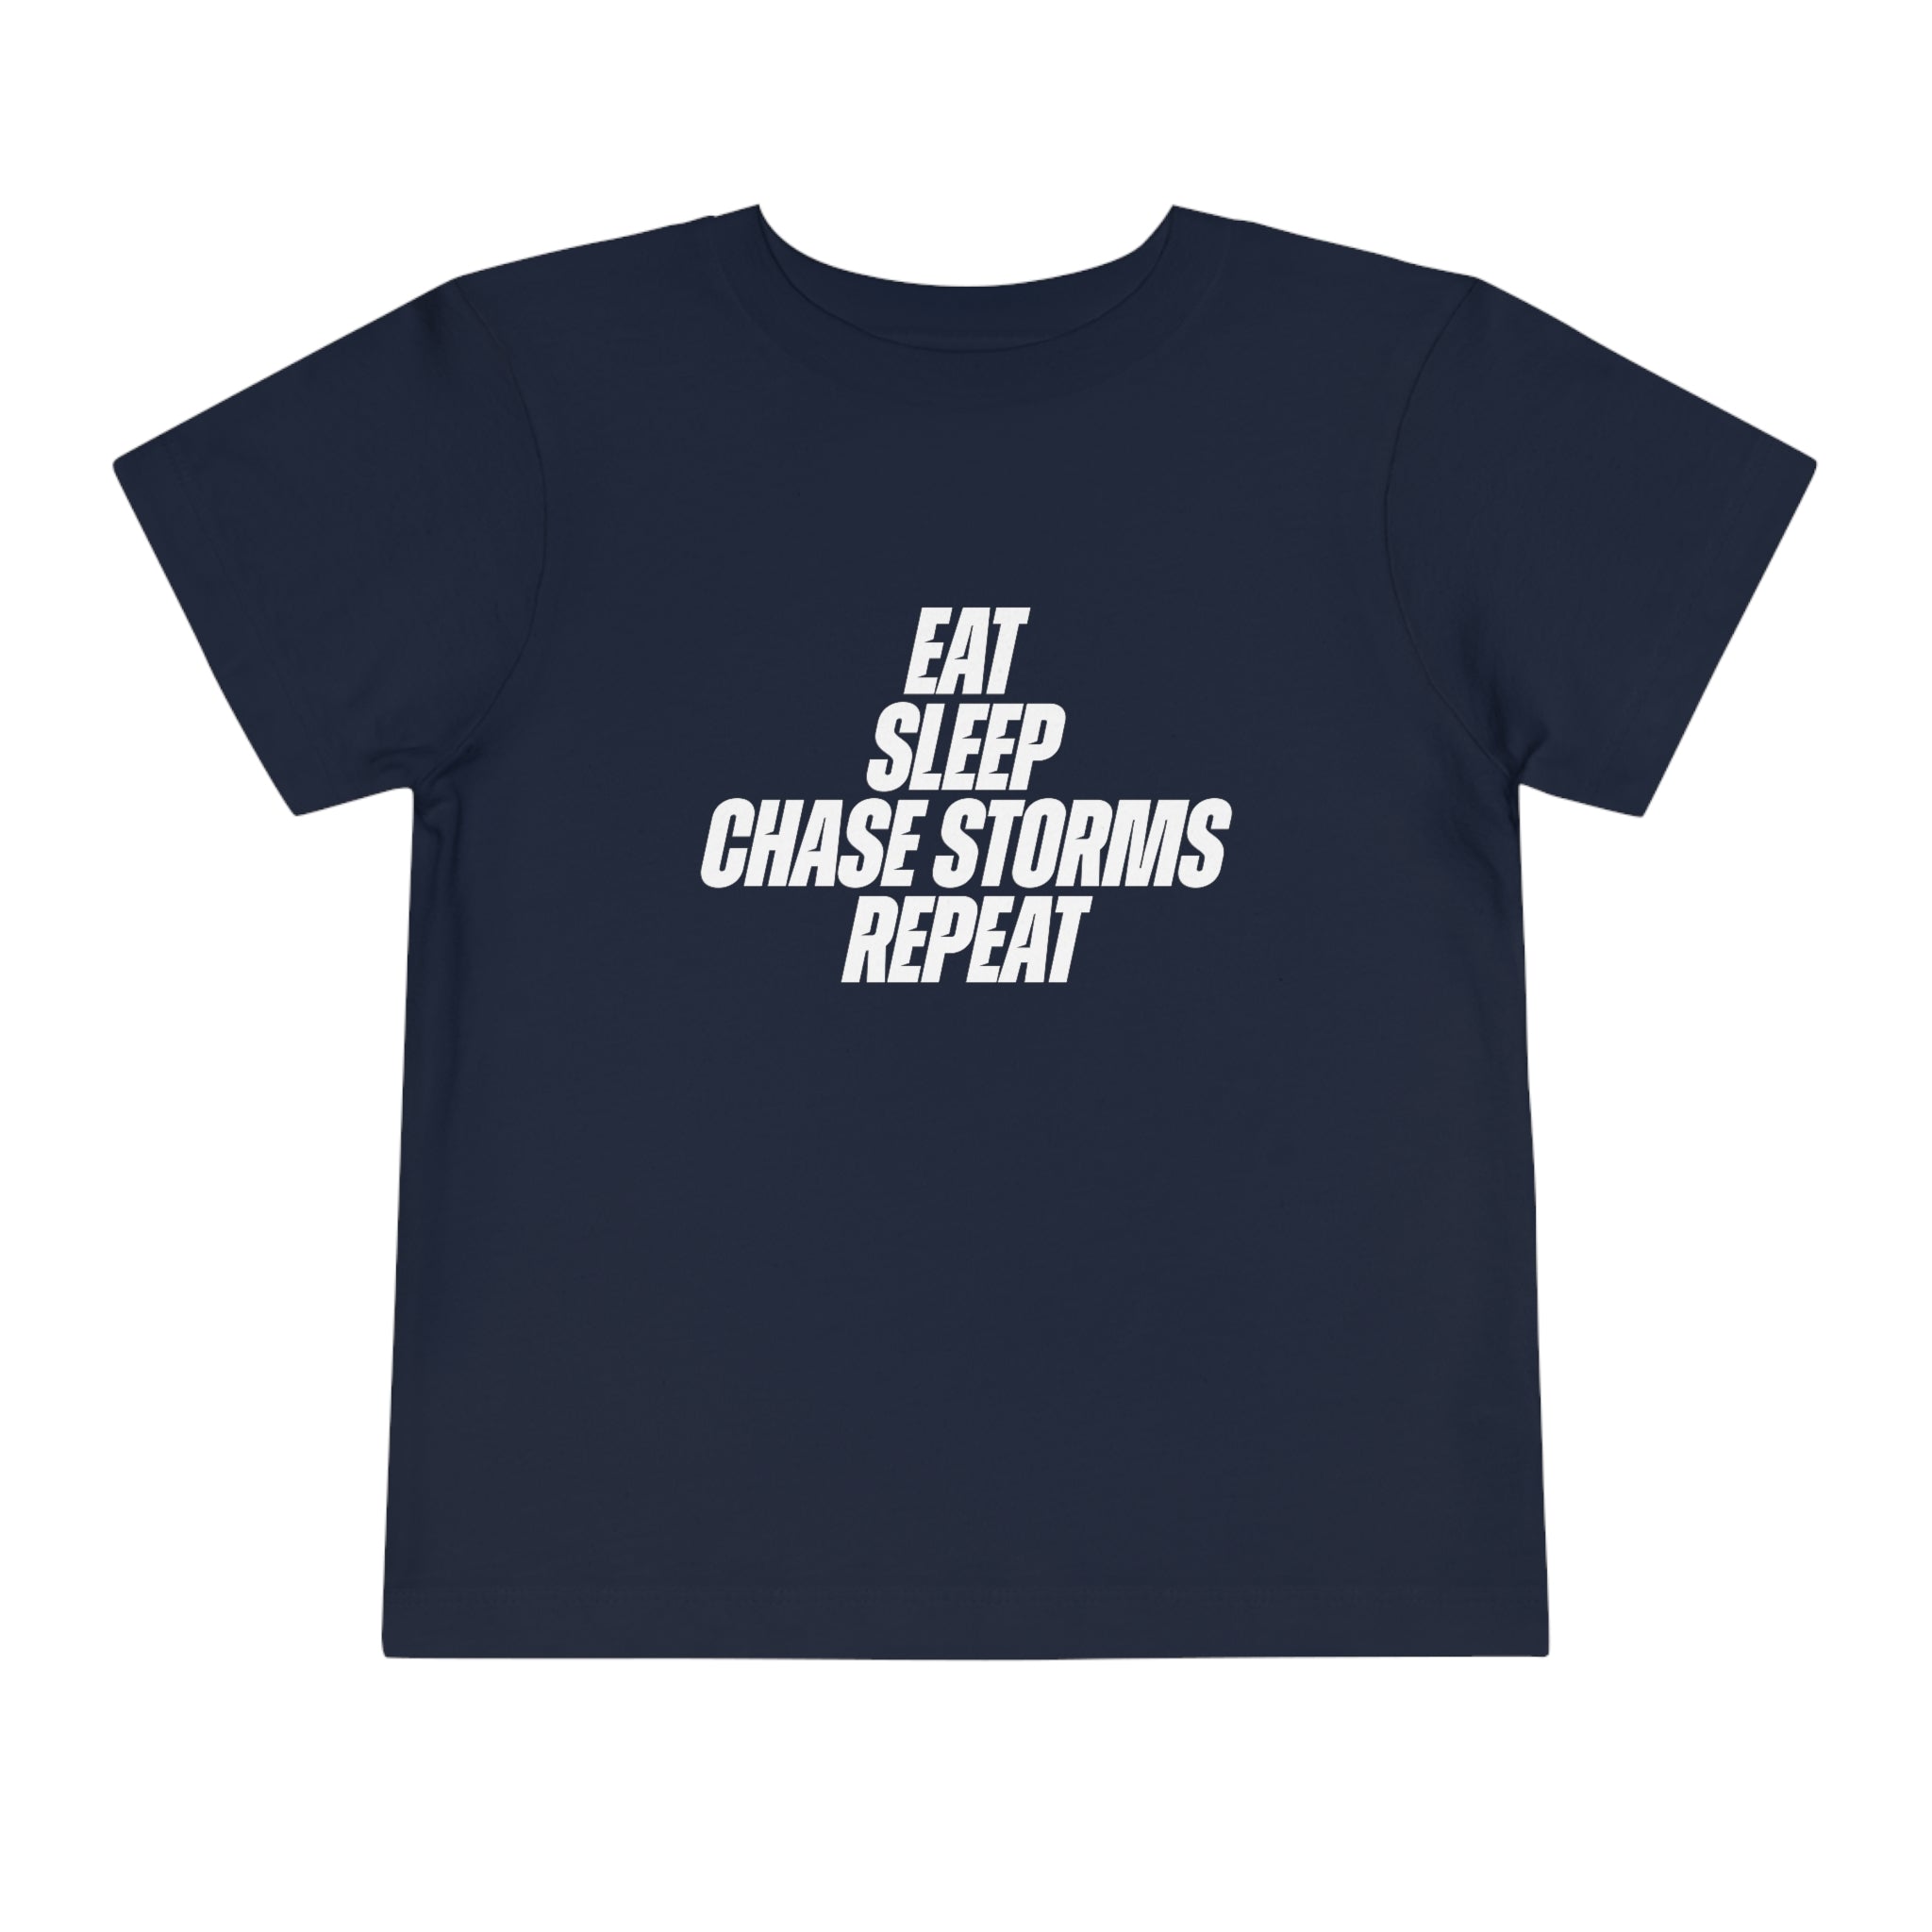 Eat, Sleep, Chase Storms, Repeat Toddler Tee 